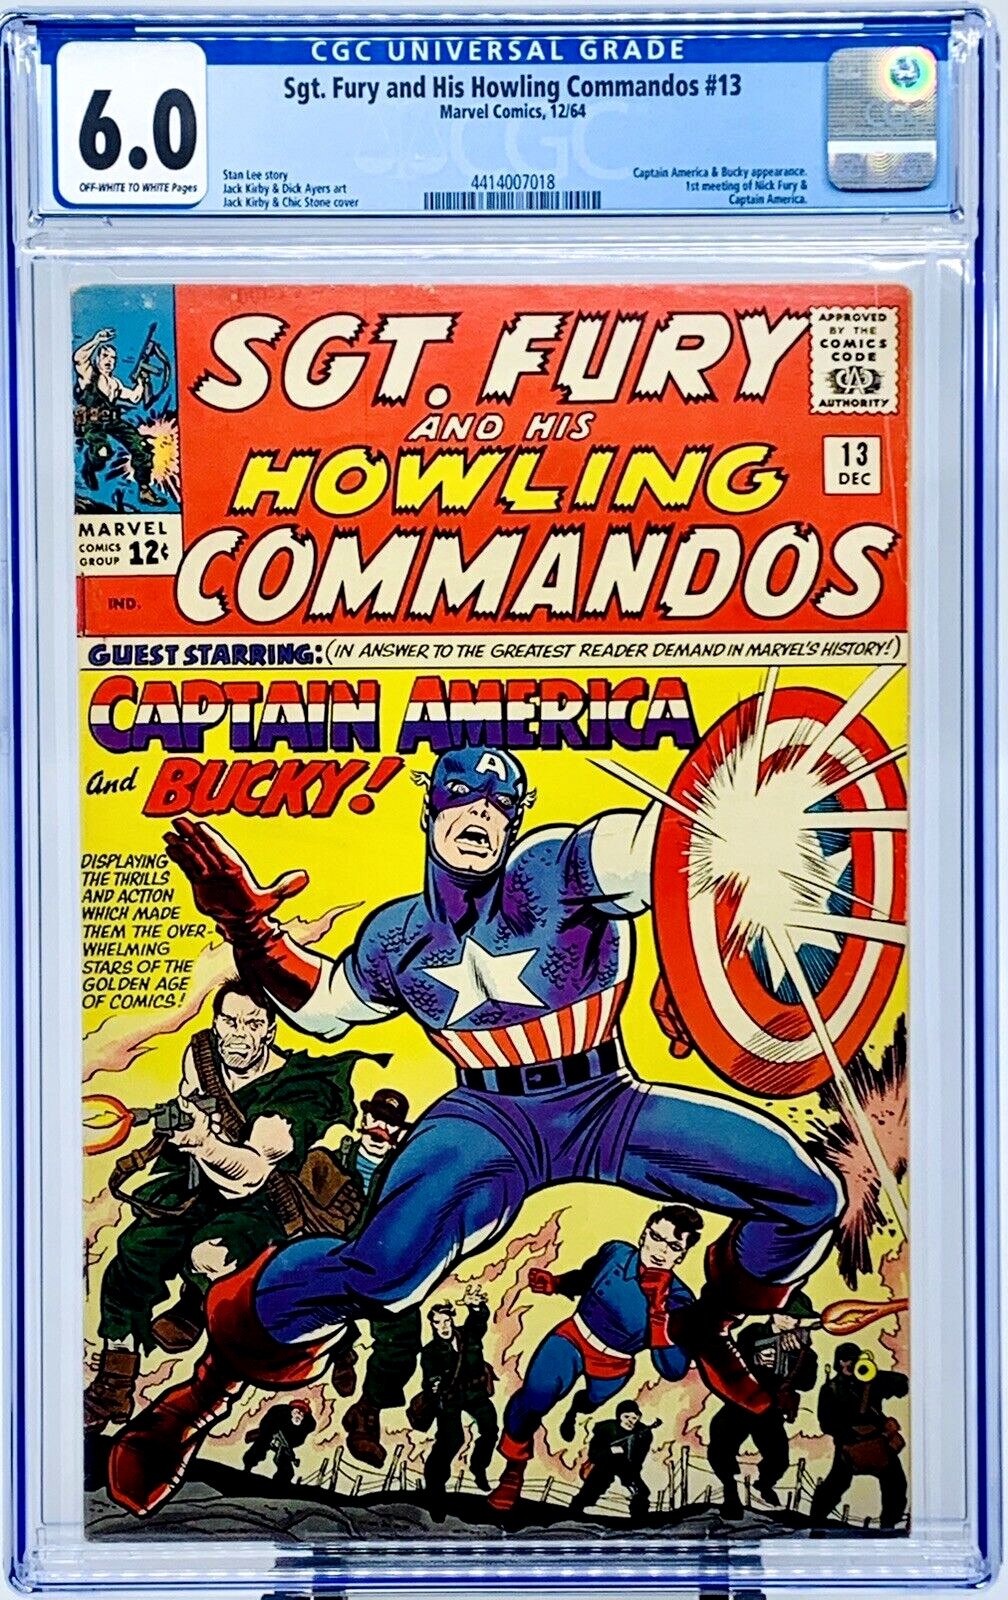 Sgt. Fury and His Howling Commandos #13 1964 CGC 6.0 JUST GRADED CLEAR CASE